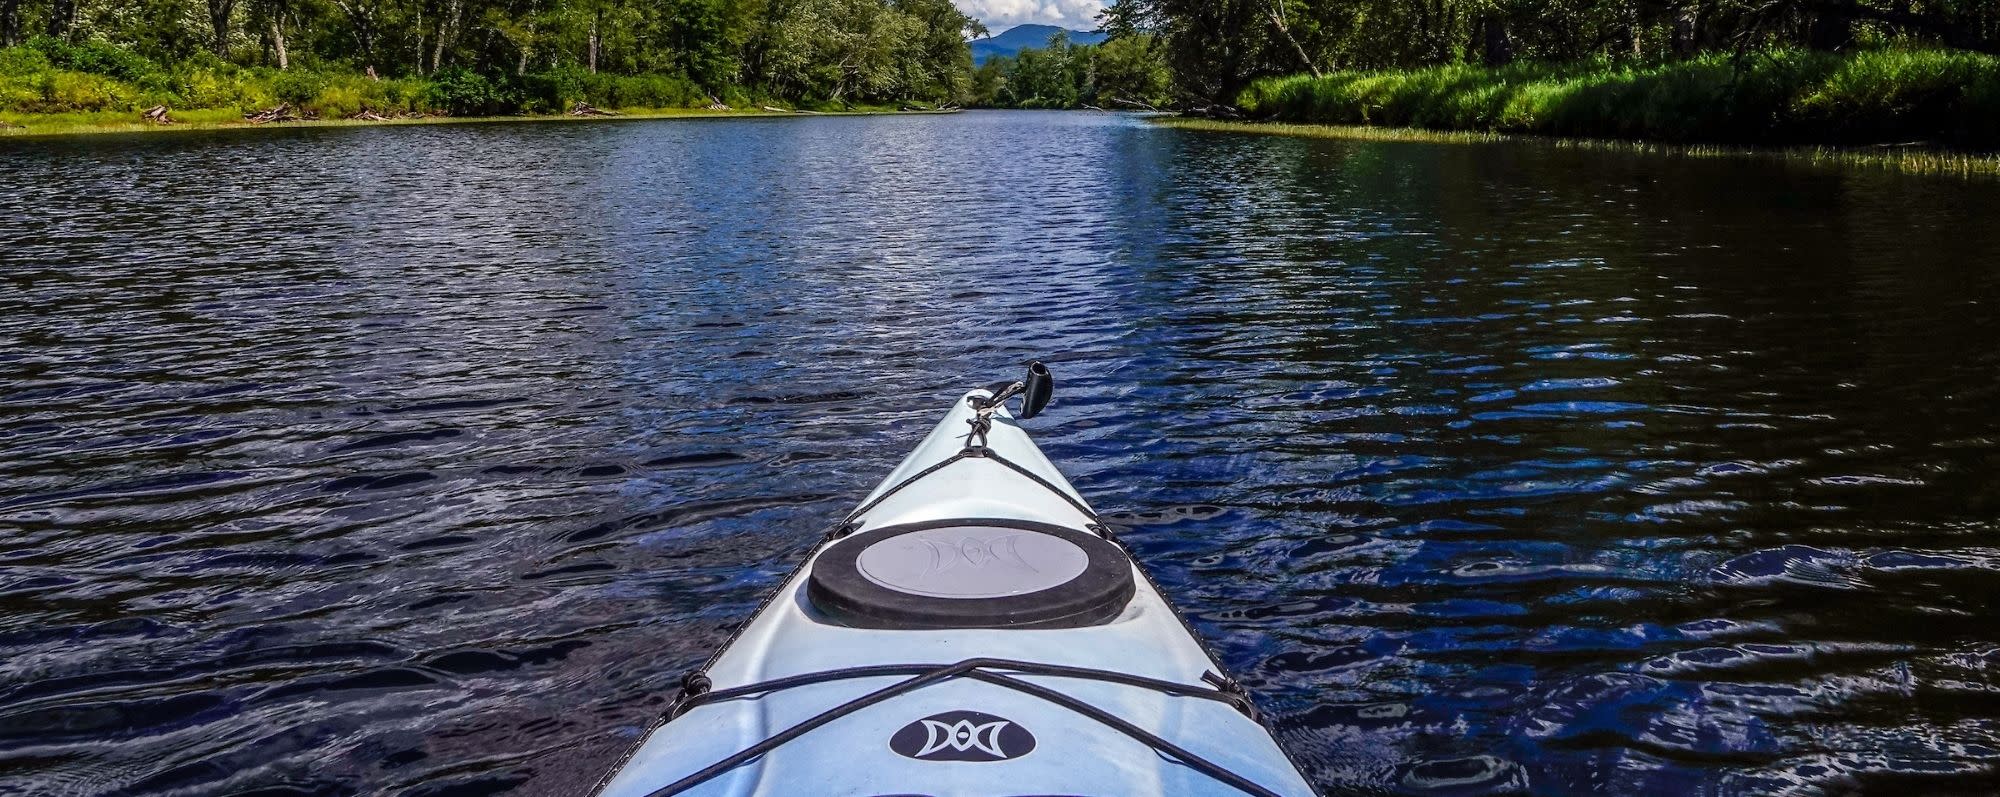 A kayaker's-eye view of kayaking on Raquette River